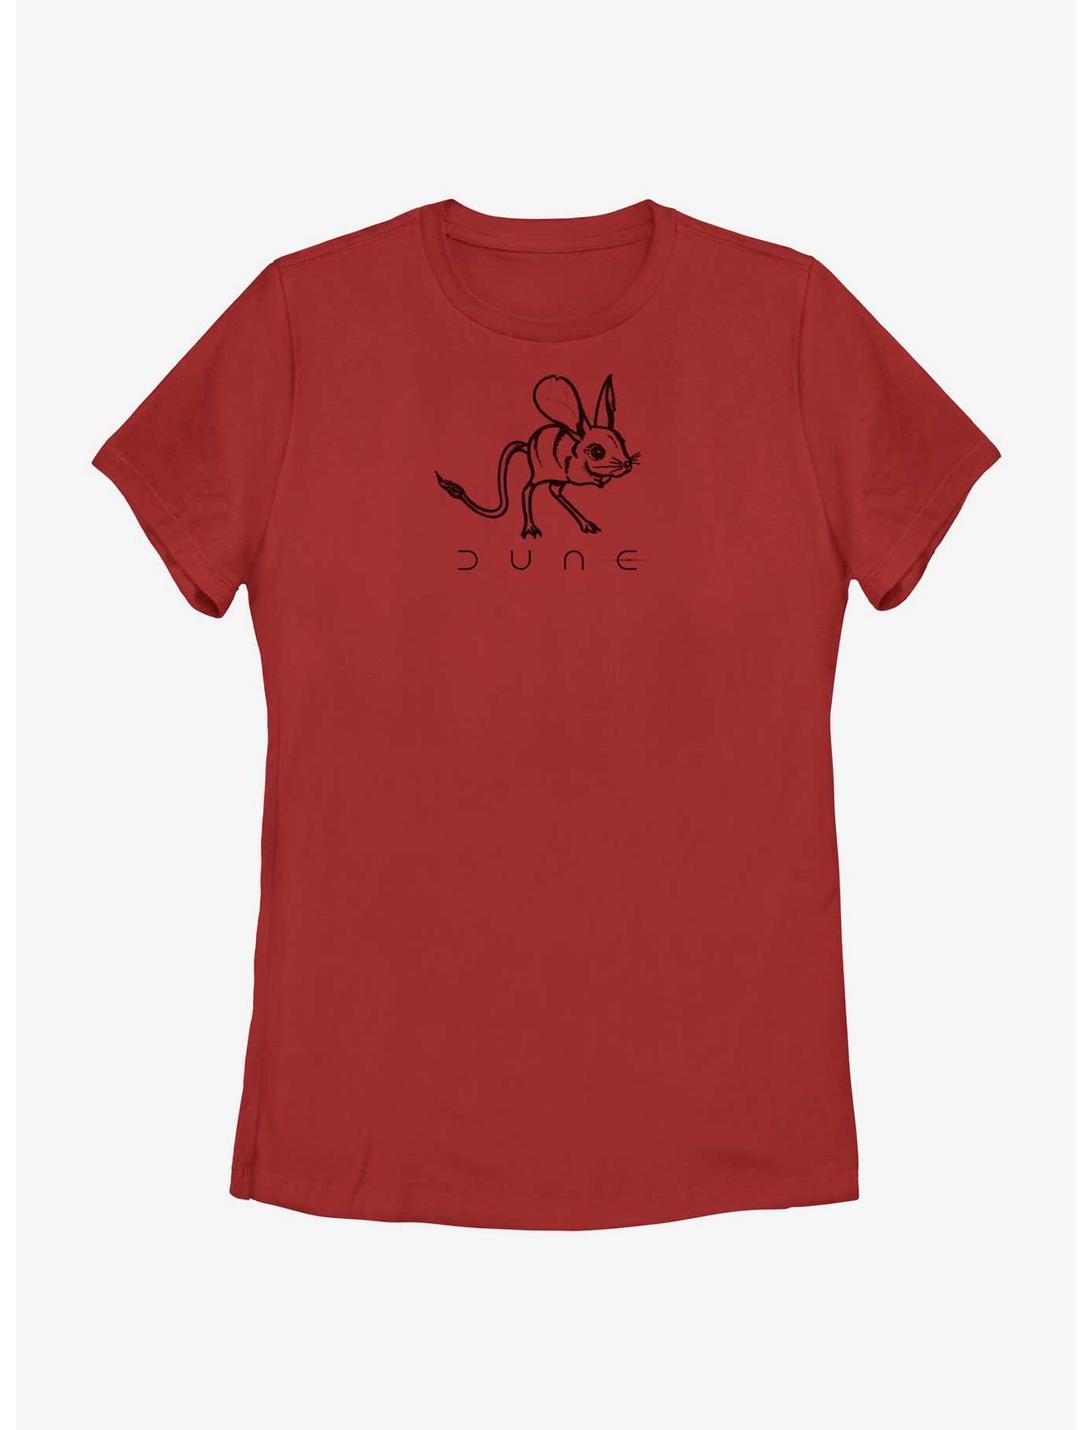 Dune: Part Two Desert Mouse Womens T-Shirt, RED, hi-res